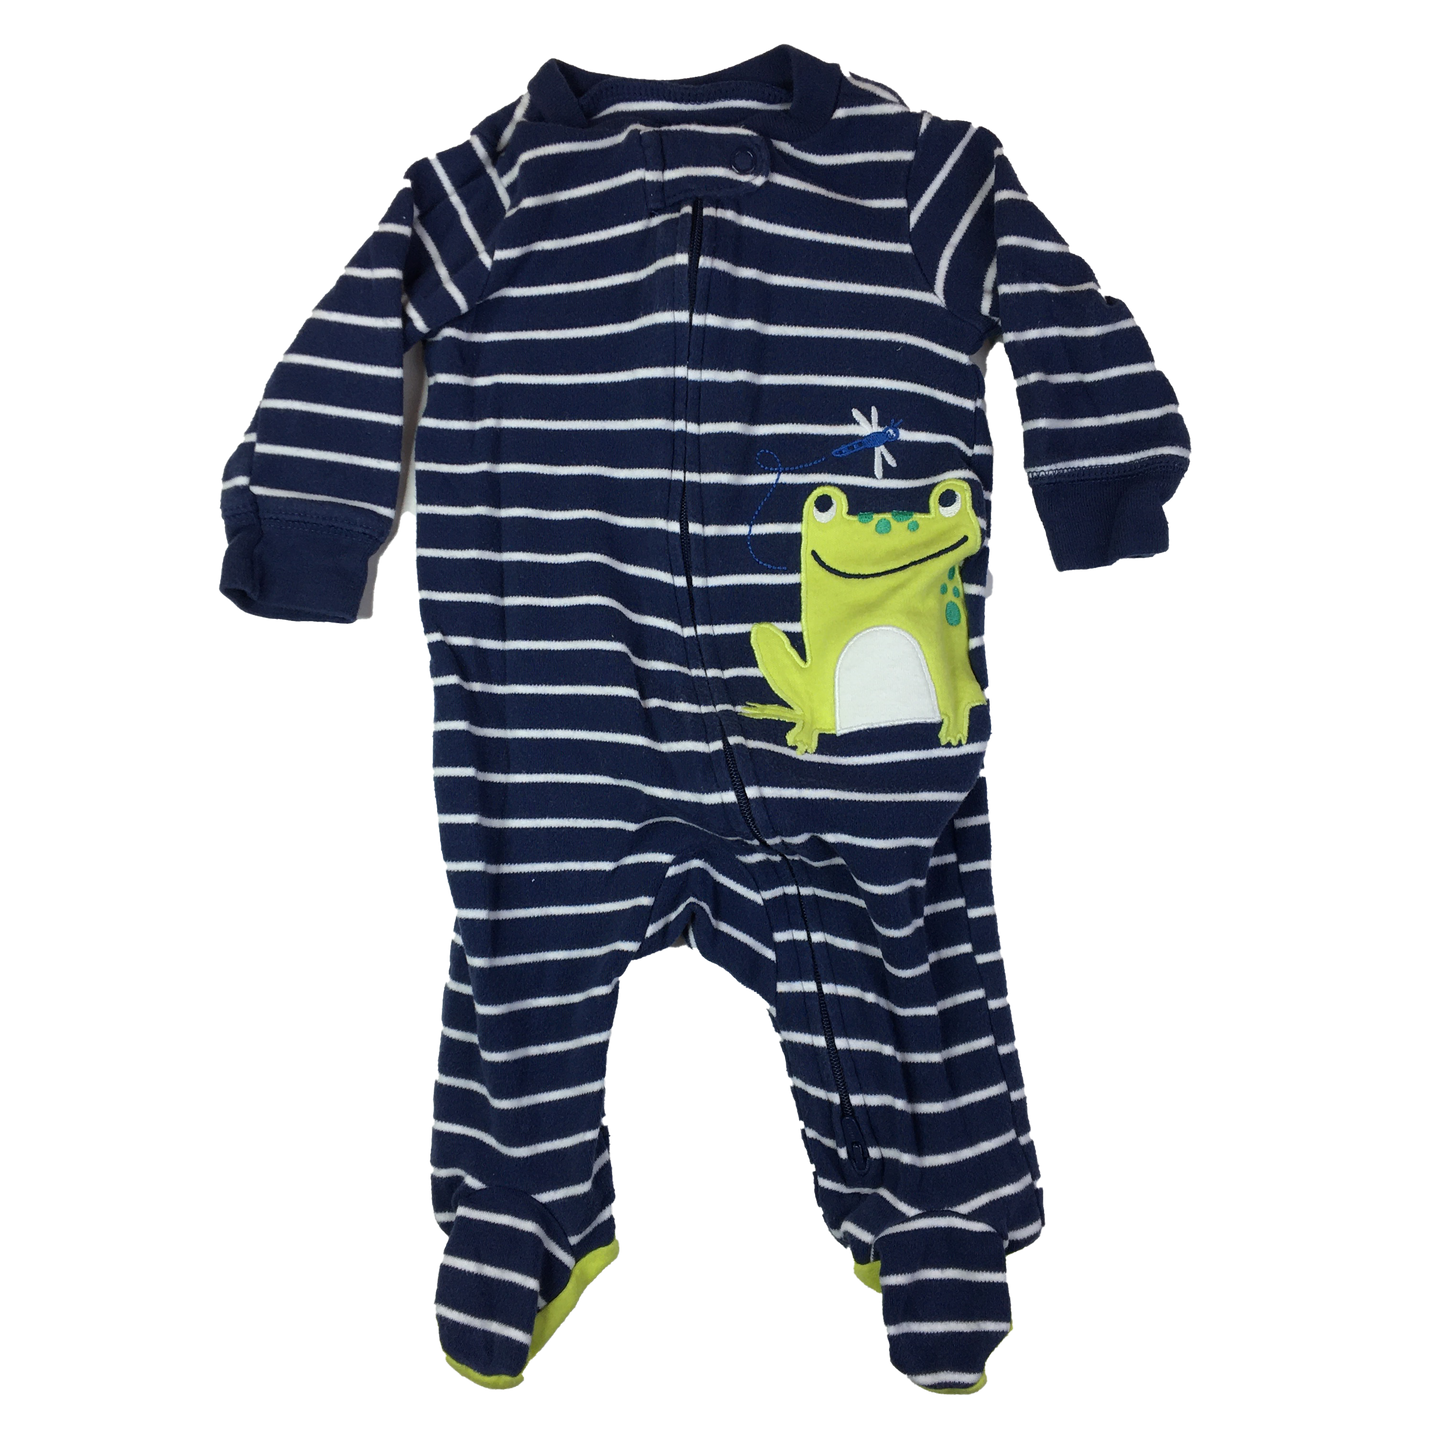 Carter's Navy & White Striped Footed Sleeper with Frog 3M